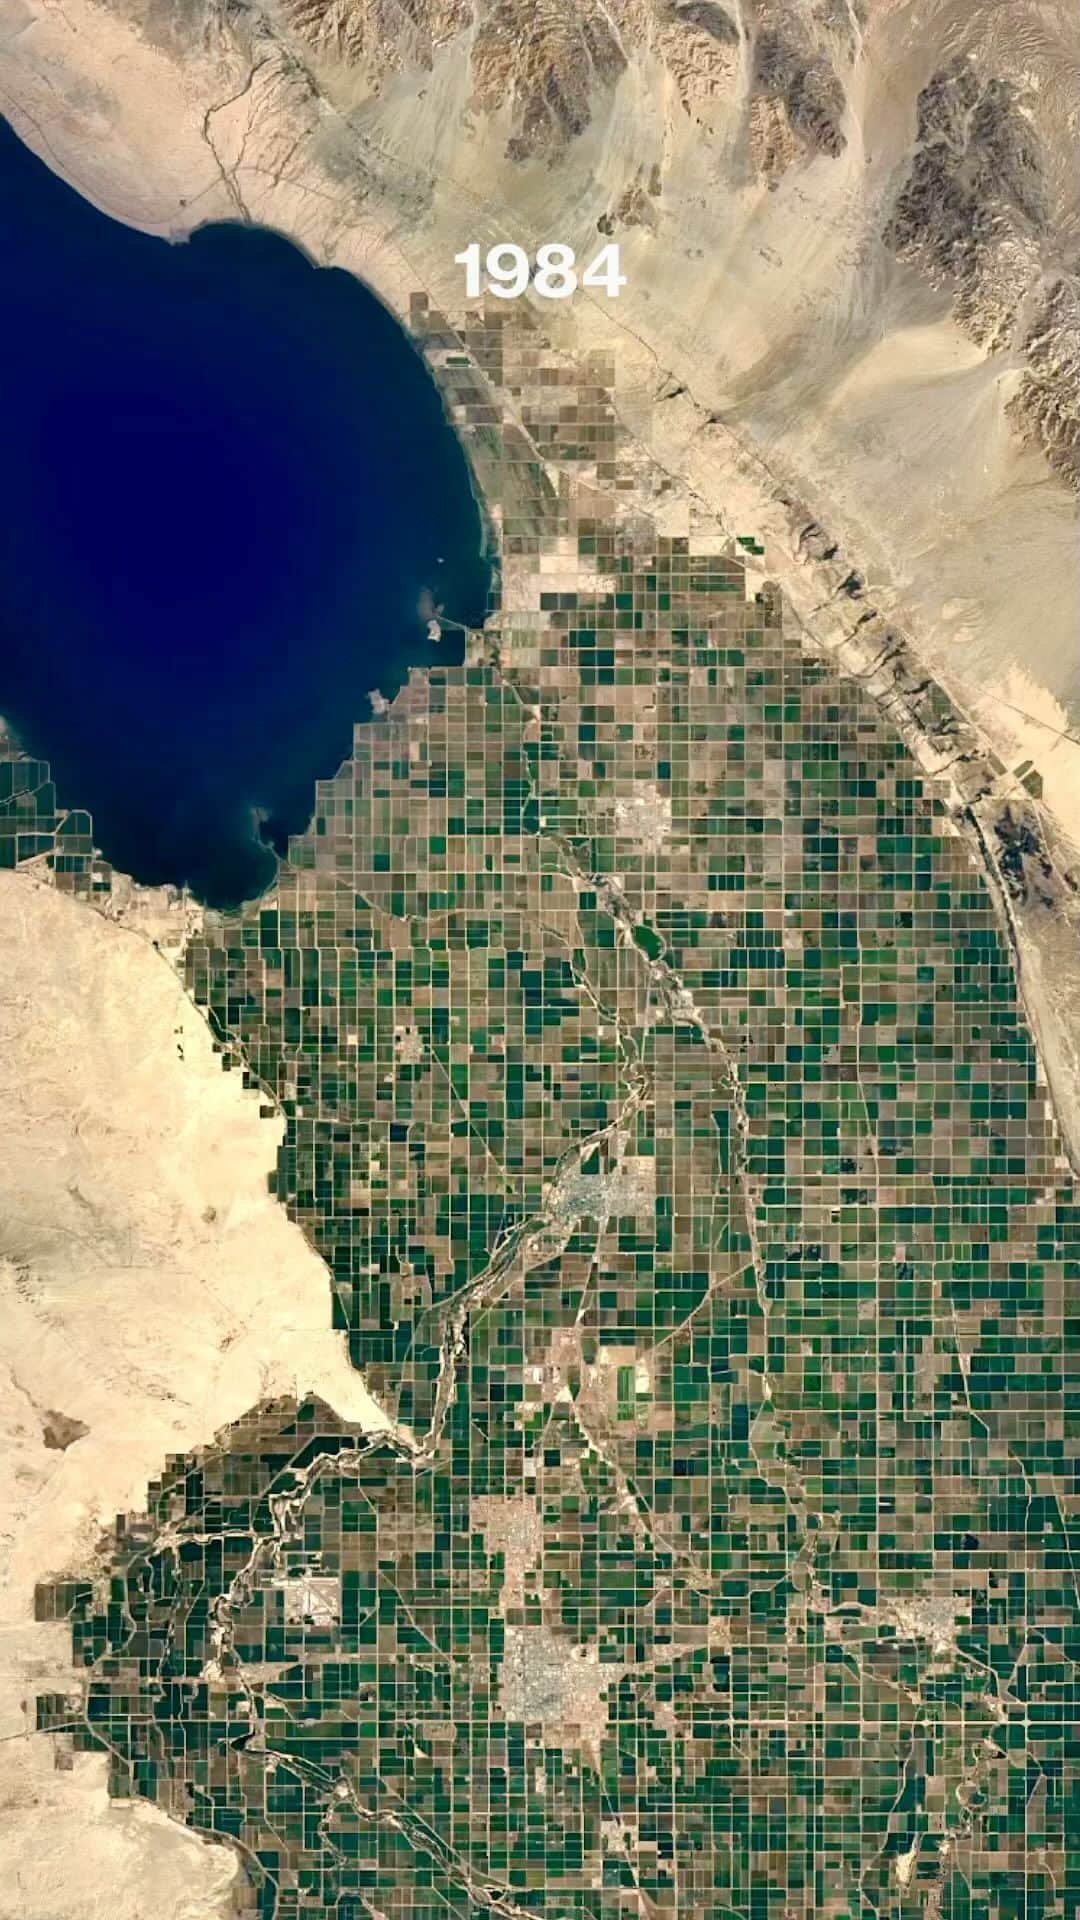 Daily Overviewのインスタグラム：「The Salton Sea is a shallow, landlocked, highly saline lake at the southern end of California. For thousands of years, the Colorado River has flowed into the lake’s valley, or has been diverted around it, depositing silt and creating fertile farmland. Roughly 1,700 square miles (4,400 square kilometers) of agricultural development stretches from the Salton Sea to the US-Mexico border, growing a variety of crops like asparagus, squash, tomatoes, watermelons, and dates. Crop rotation accounts for the color variations in this Timelapse.  Created by @dailyoverview Source imagery: NASA / Google Timelapse」